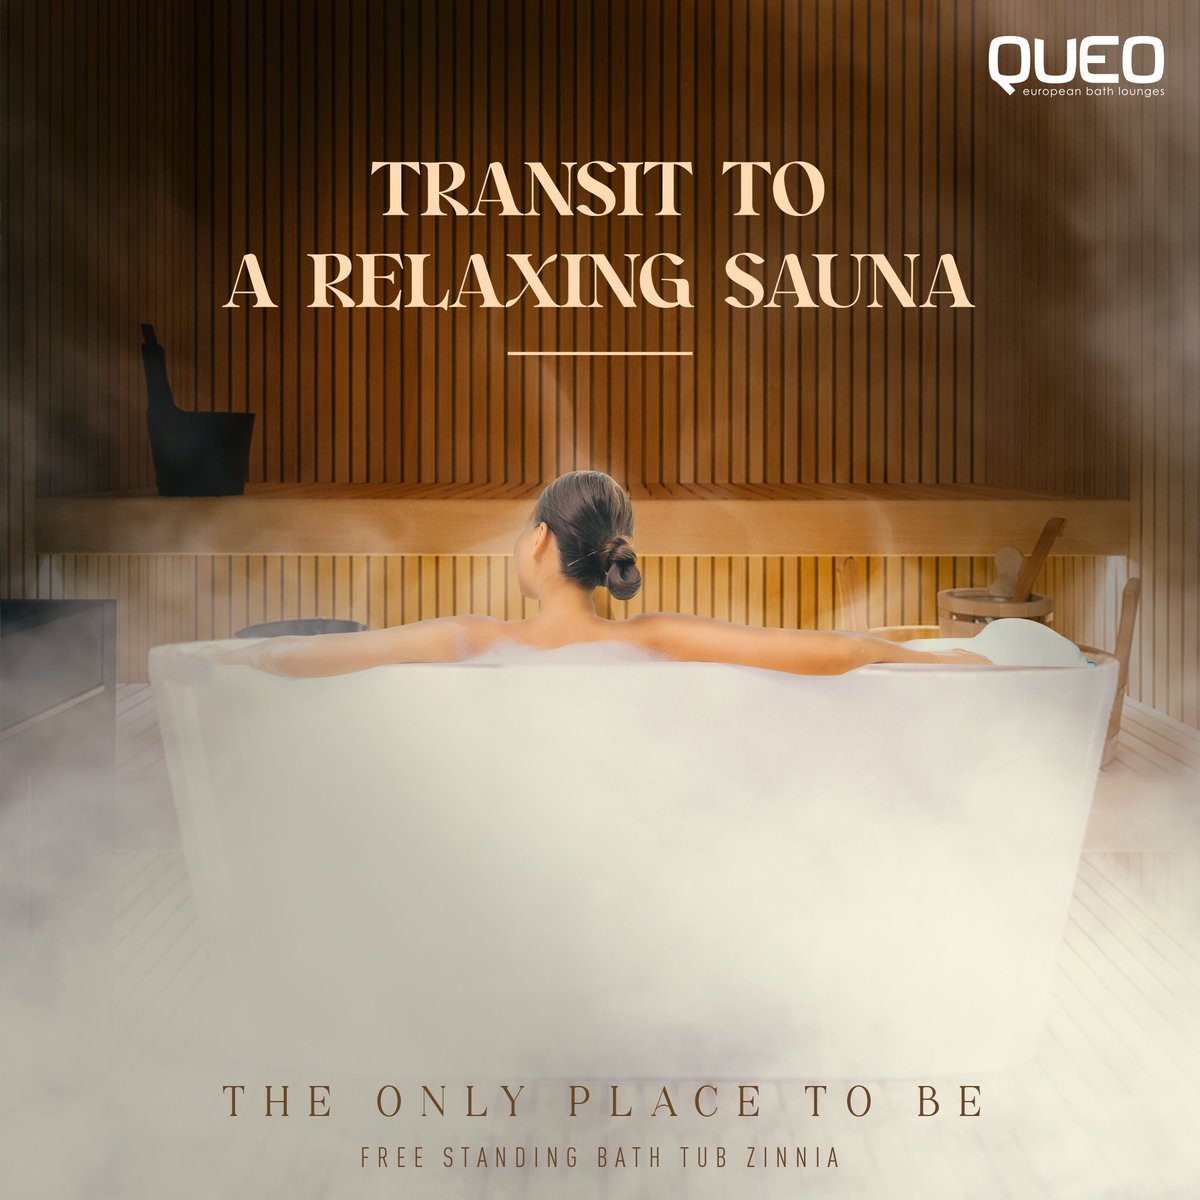 Bring the serenity of relaxing European Saunas to your bath lounge.
Relax & Revive in Queo's Zinnia Bathtub 
.
.
#TheOnlyPlaceToBe

#Queo #QueoBathrooms #FreeStandingBathTub #Zinnia #BathLounge #LuxuryBathroomsByQueo #Luxury #LuxuryLifestyle